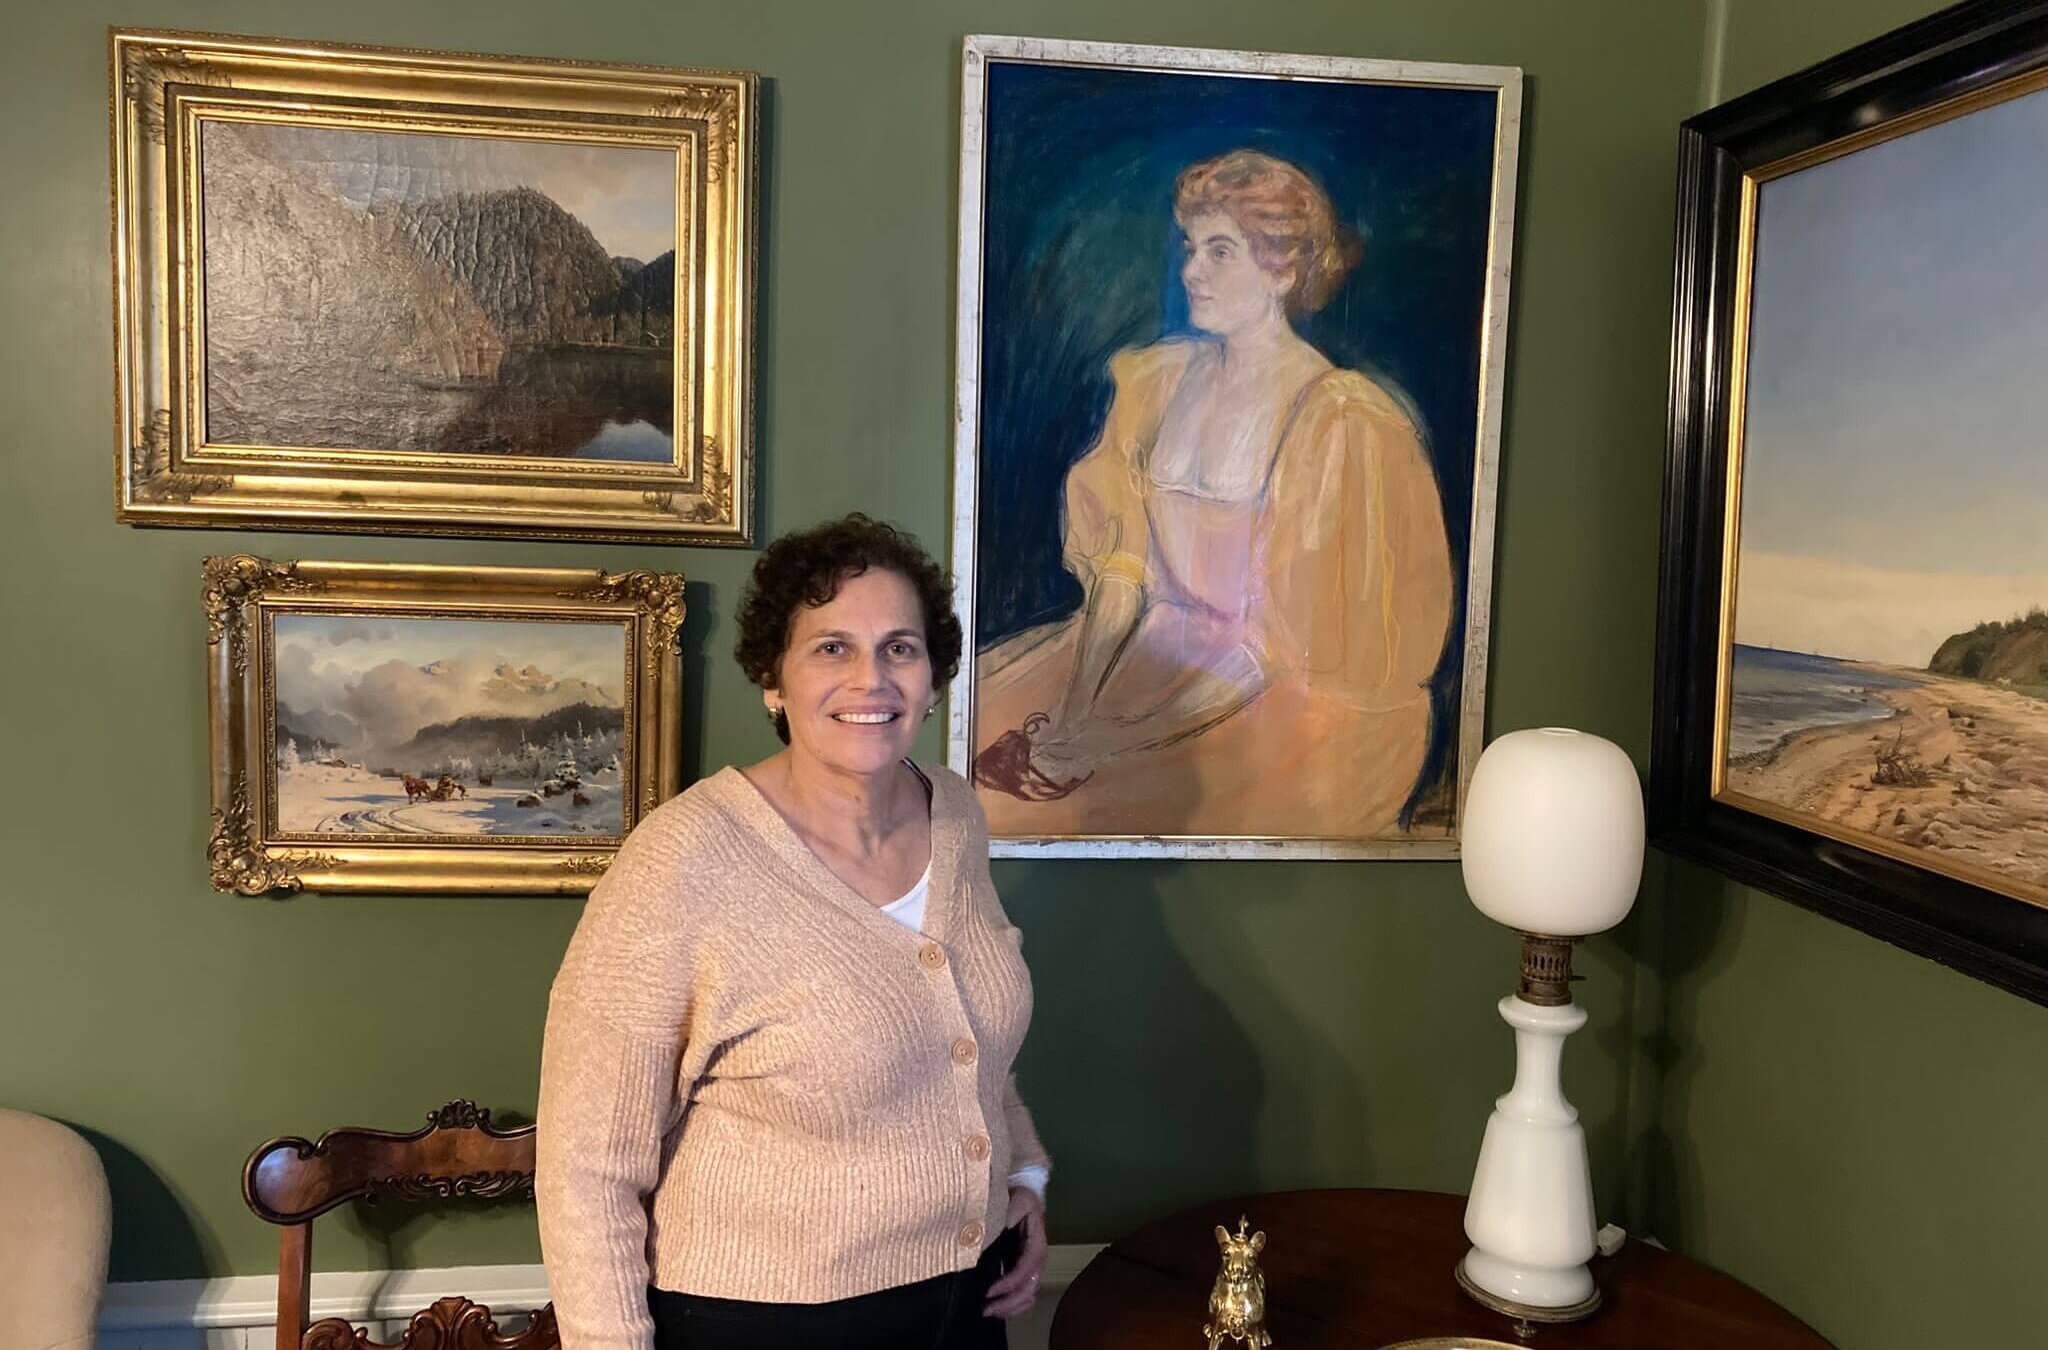 The author with an Edvard Munch portrait of Selma Fontheim.